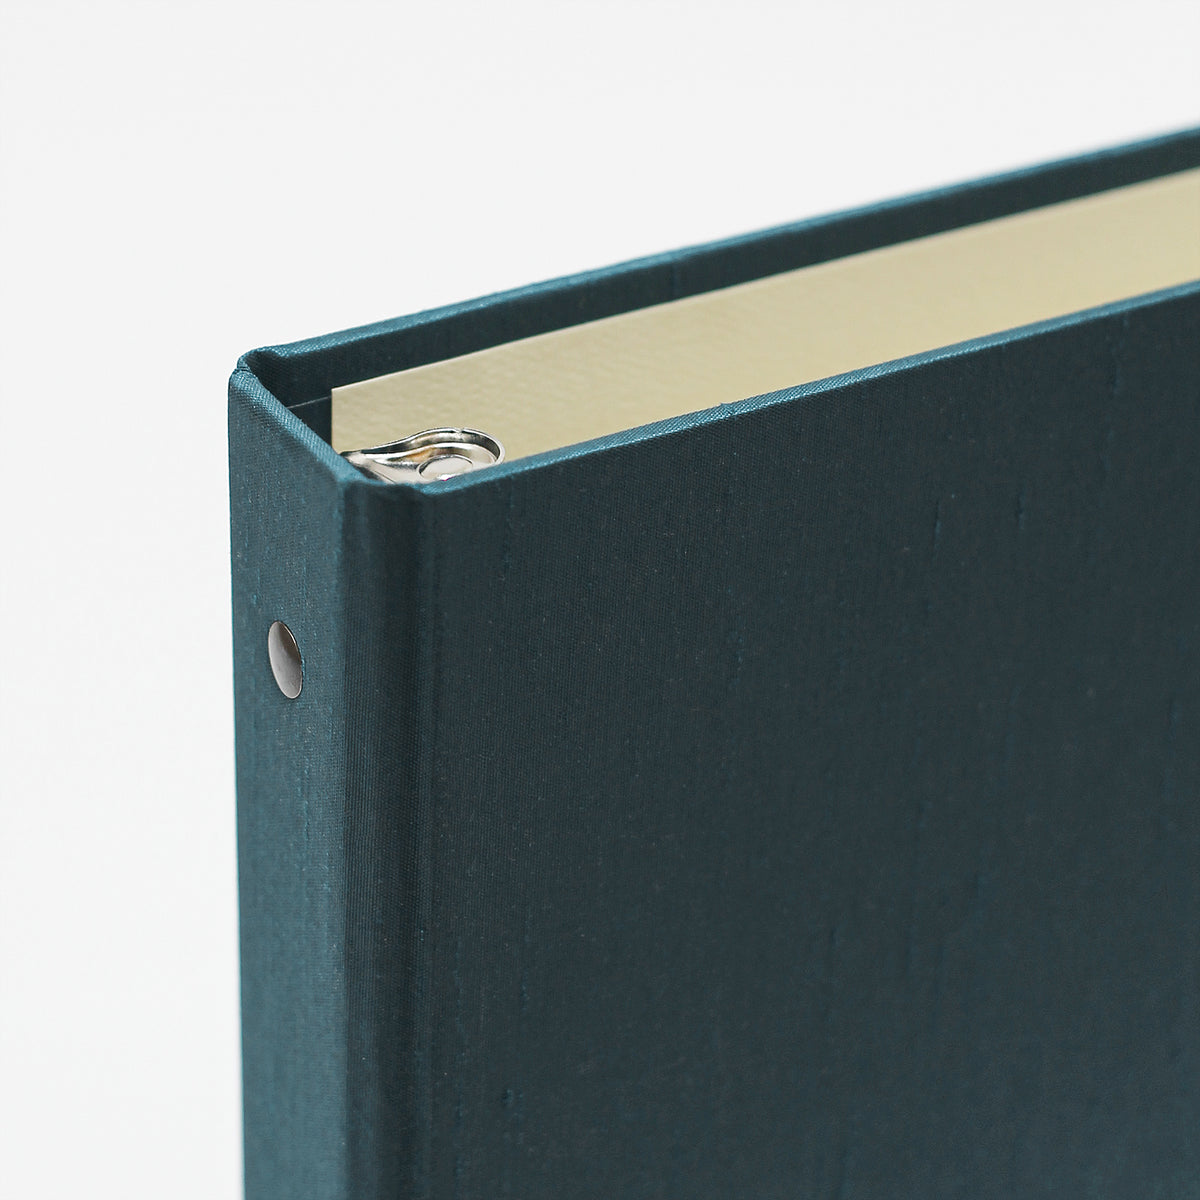 Officiant Binder | Cover: Teal Blue Silk | Available Personalized